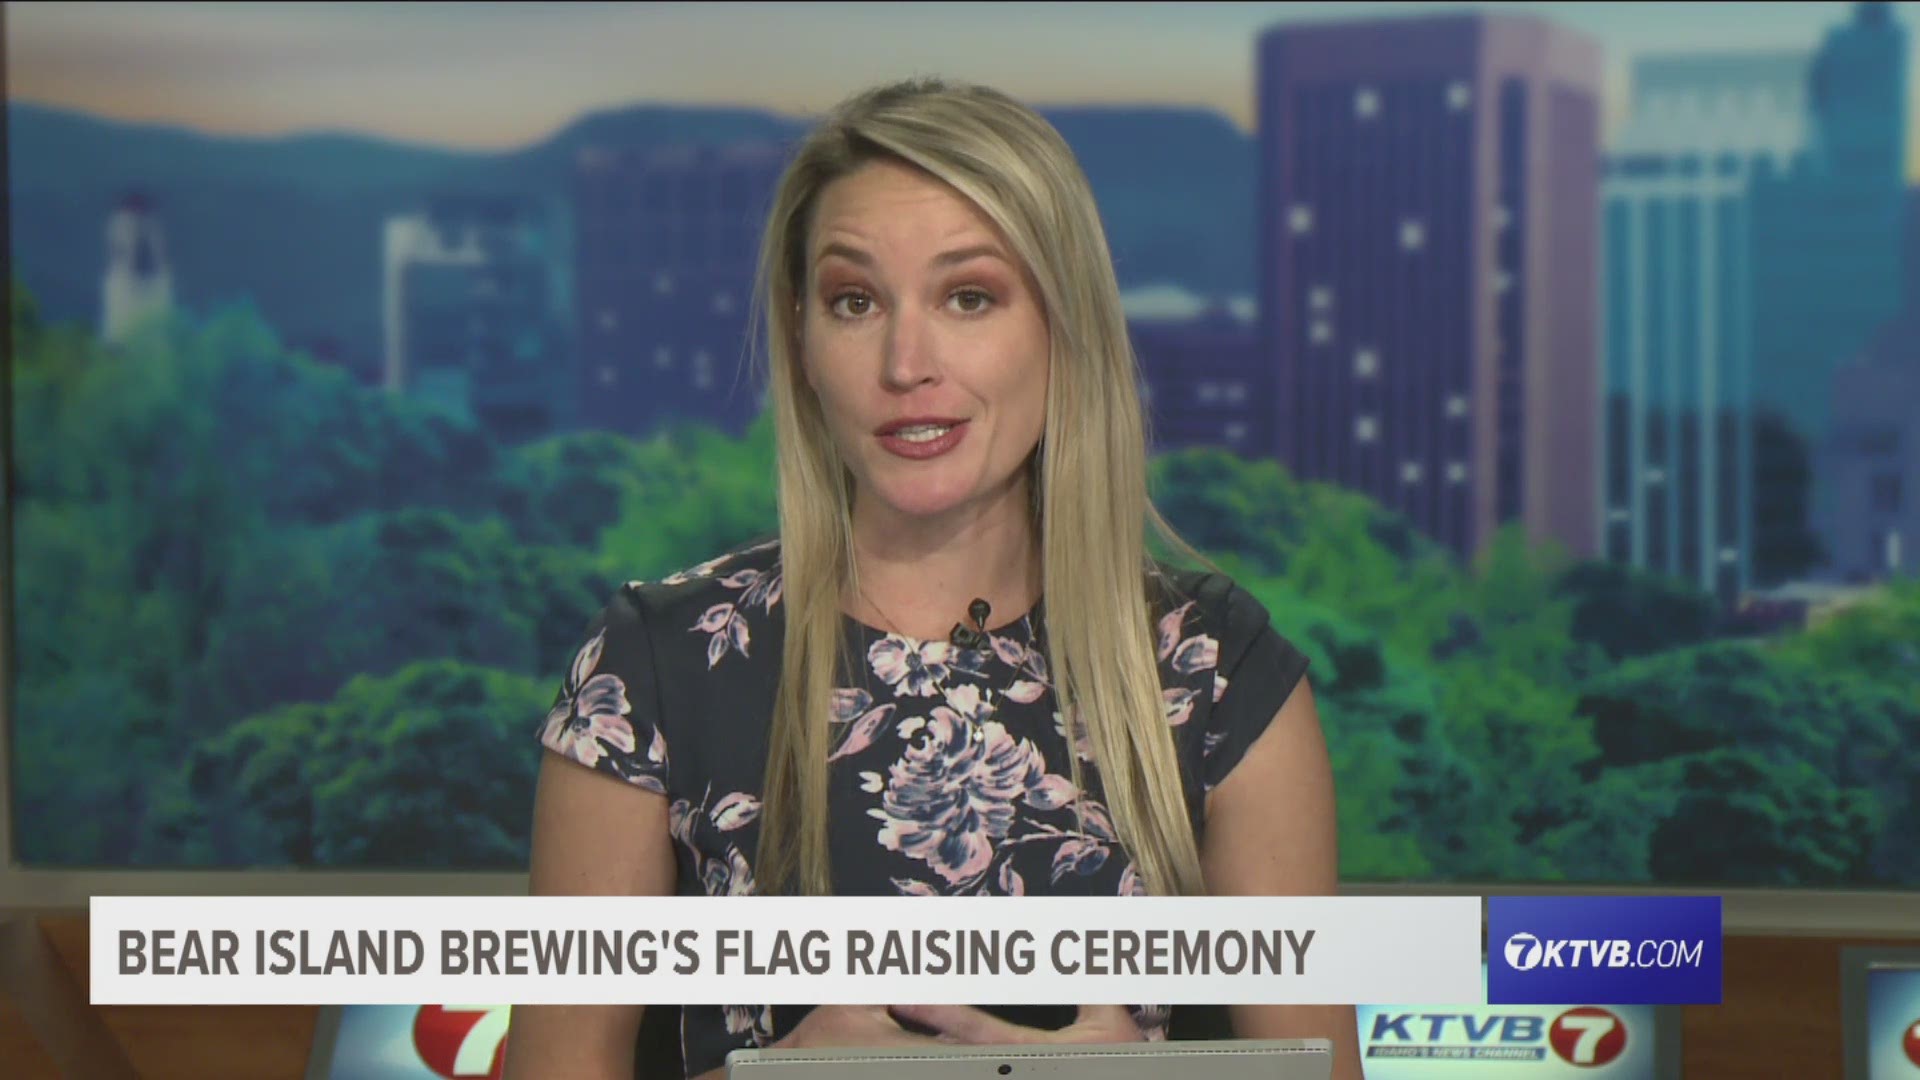 Bear Island Brewing is a veteran-owned business that brewed up a special event to honor veterans during the annual rivalry football game.